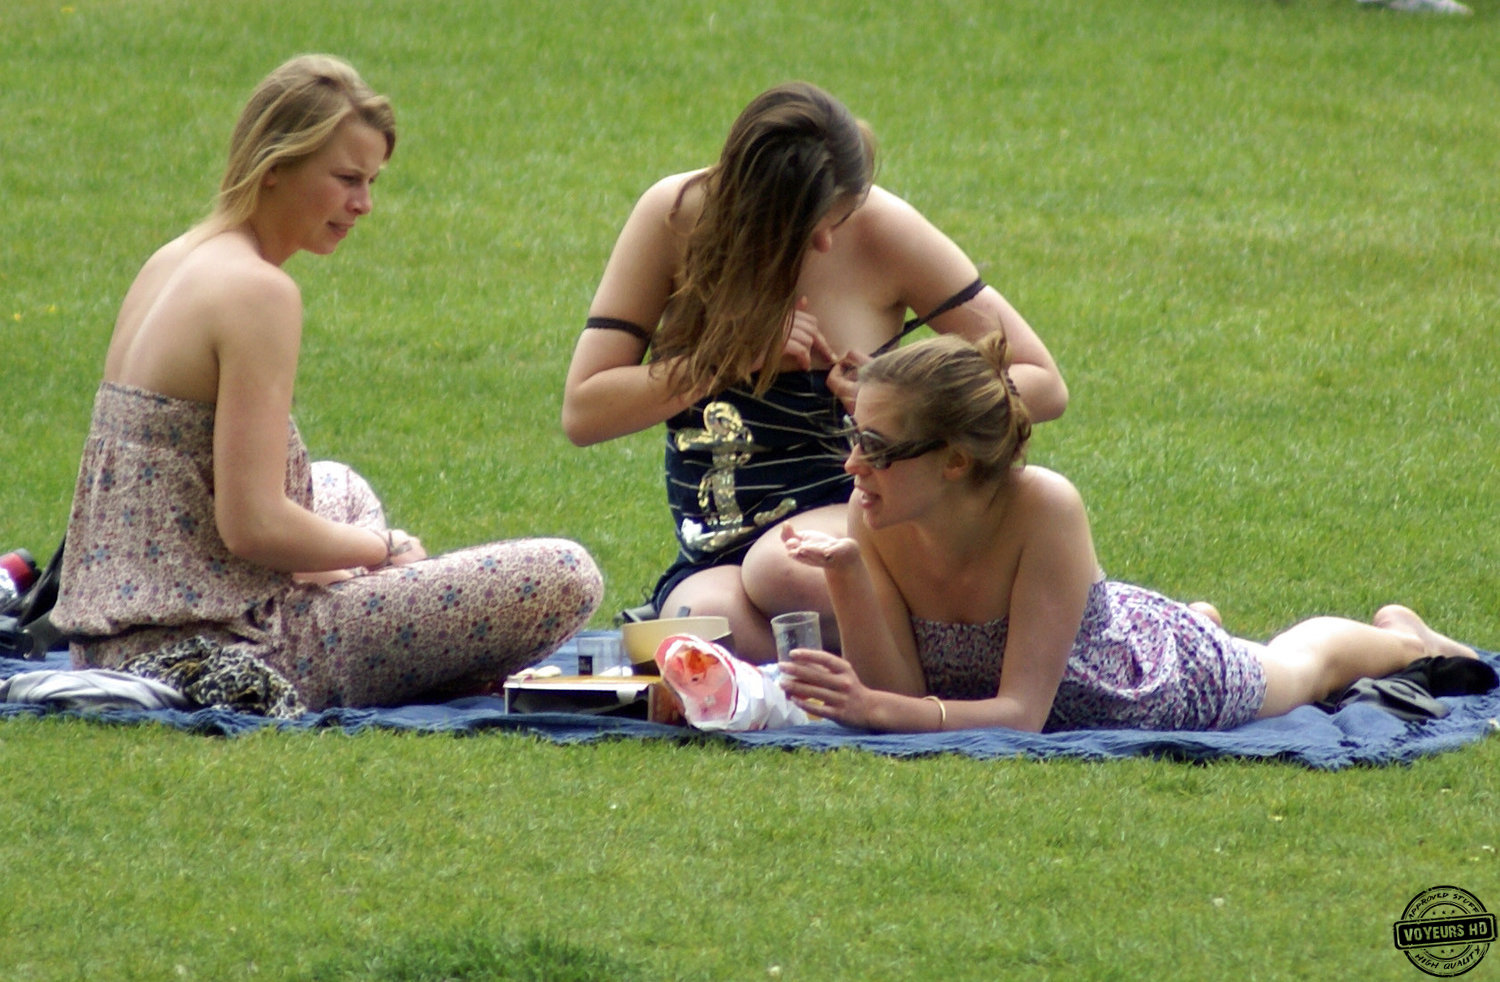 Lawn Party with Cleavage - Voyeur Videos.